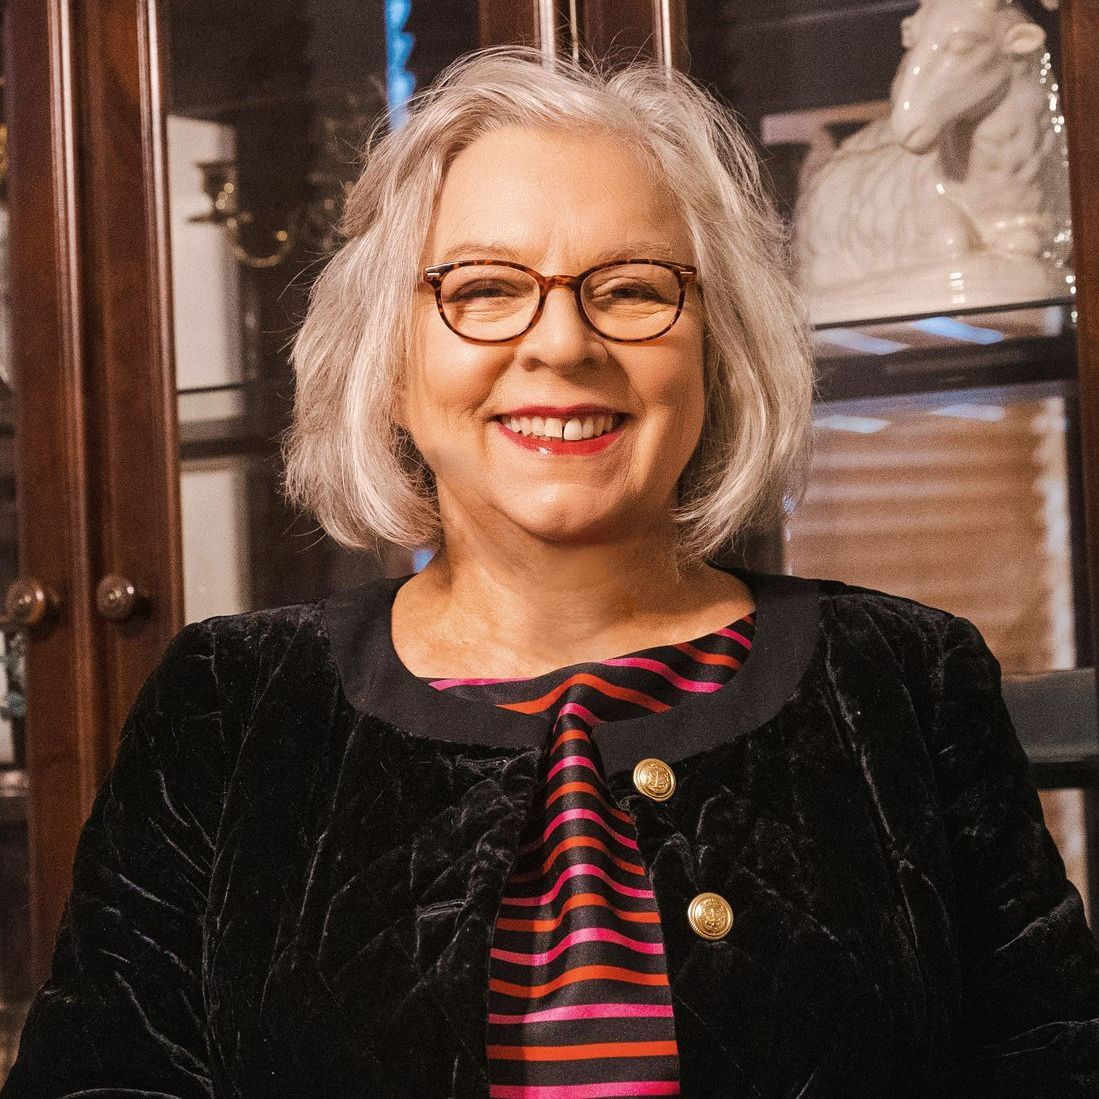 A woman wearing glasses and a black jacket is smiling for the camera.